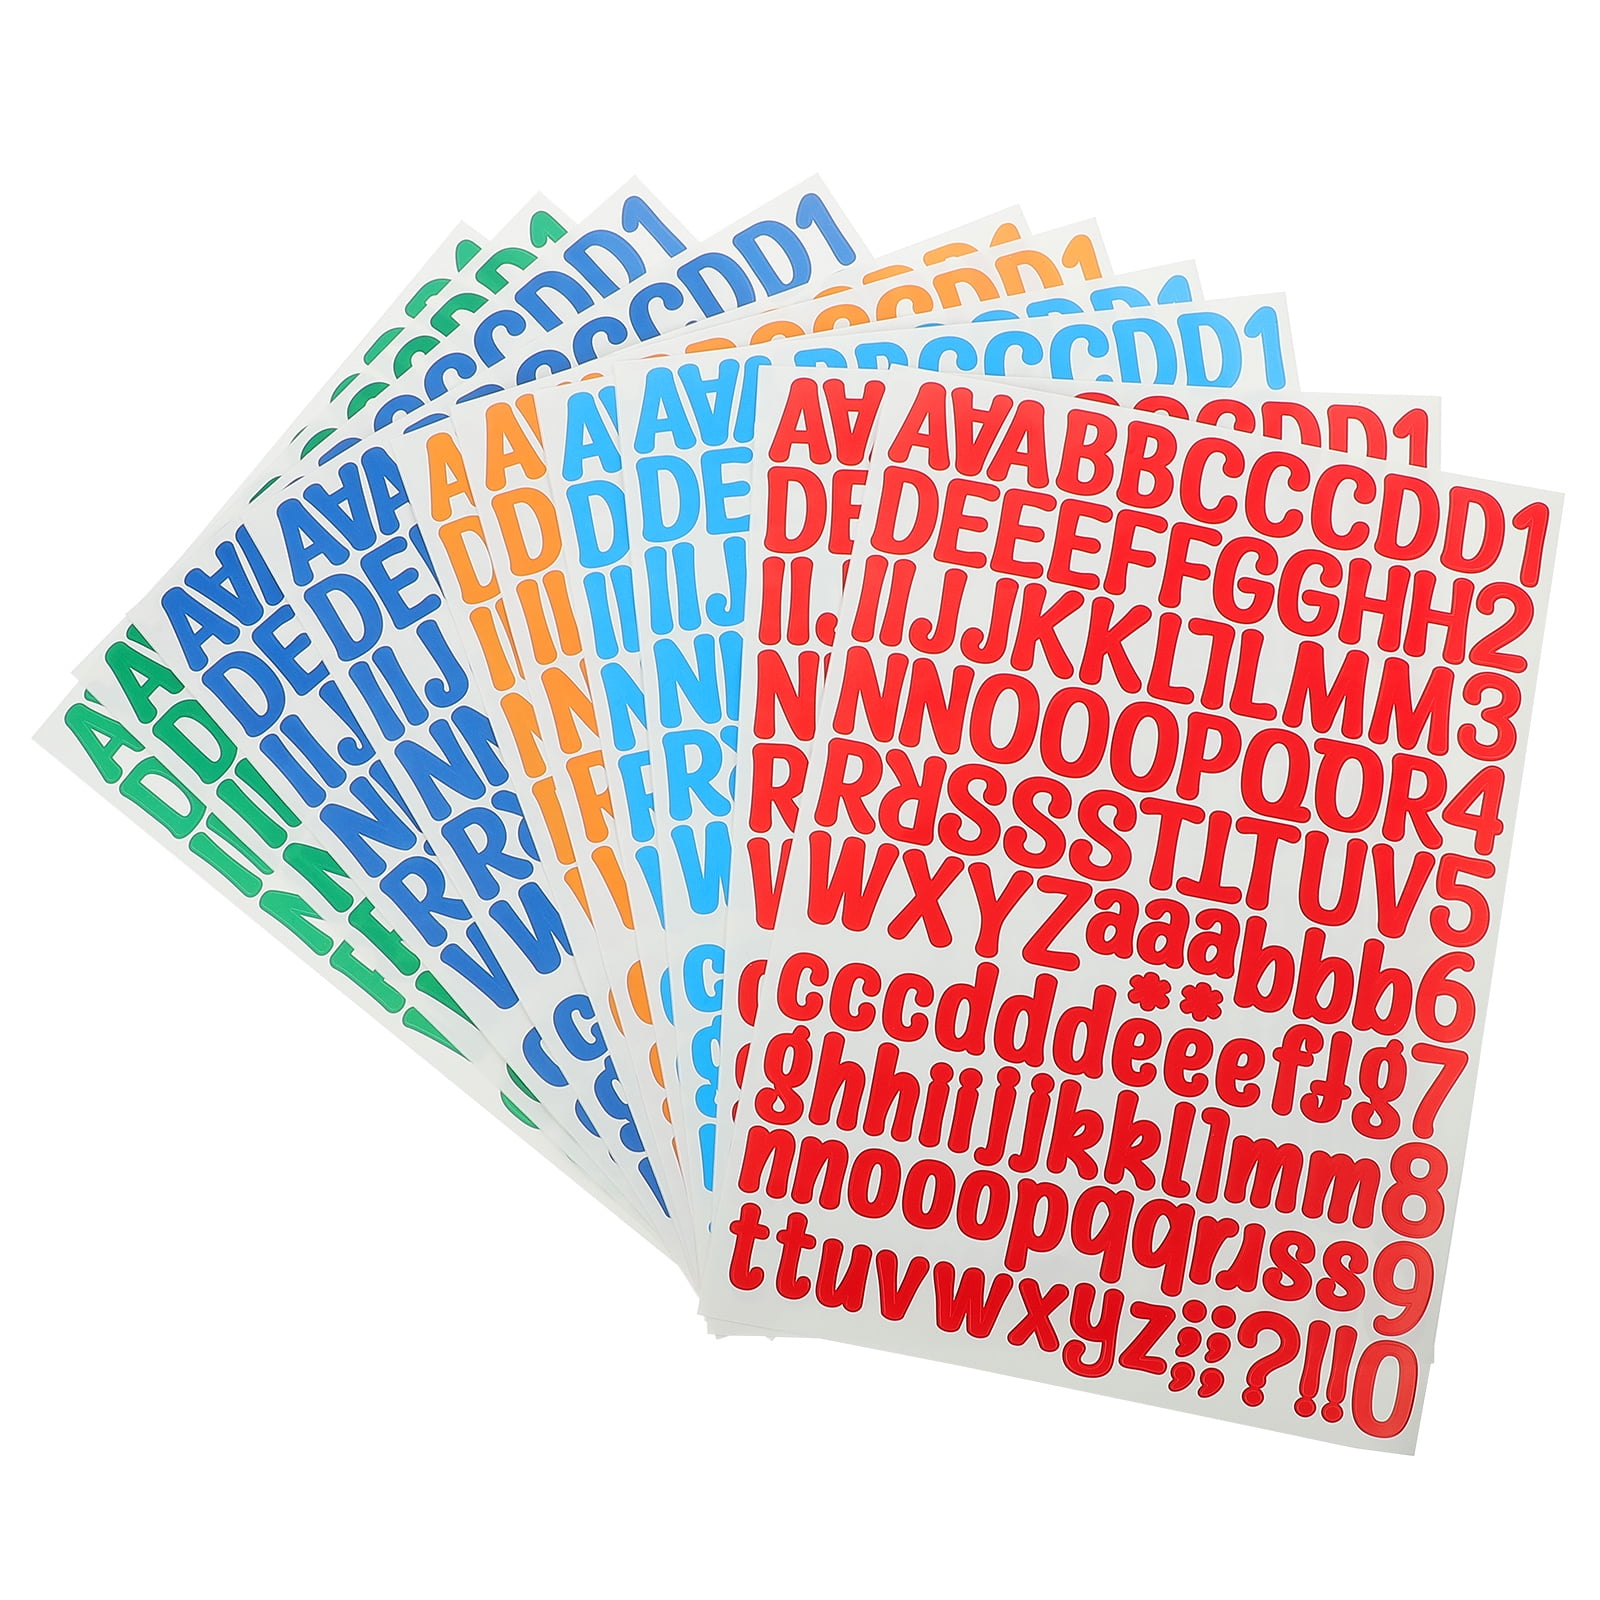  Ciieeo 5pcs tag Stickers Decor Scrapbook Number Decals Letters  for Crafts Letter Decals Alphabet Decals Numbers Sticker Name Sticker Label  Combination Child Portfolio Handwriting : Office Products